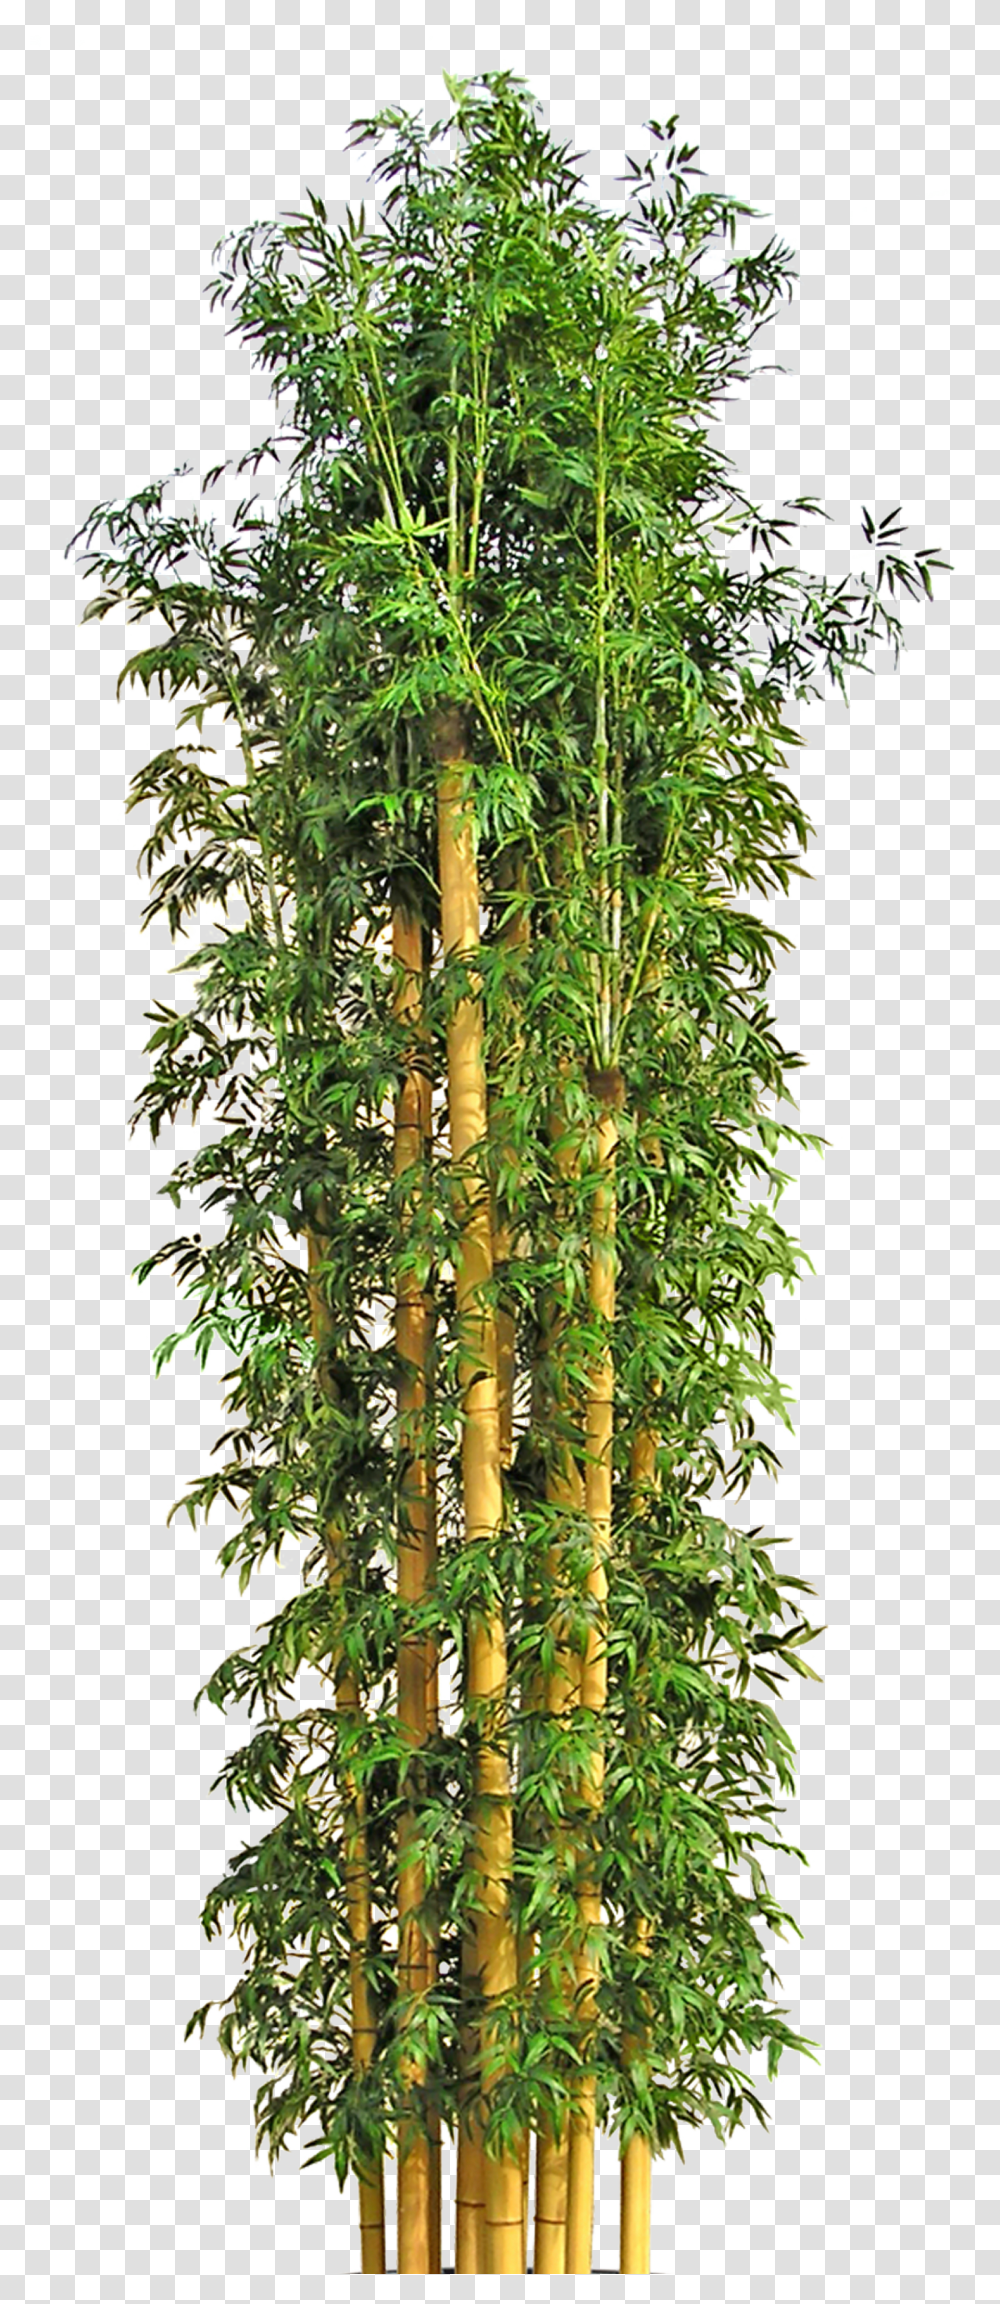 Bamboo Flowerpot Tree Hd Image Free Clipart Clipart Trees Bamboo Transparent Png